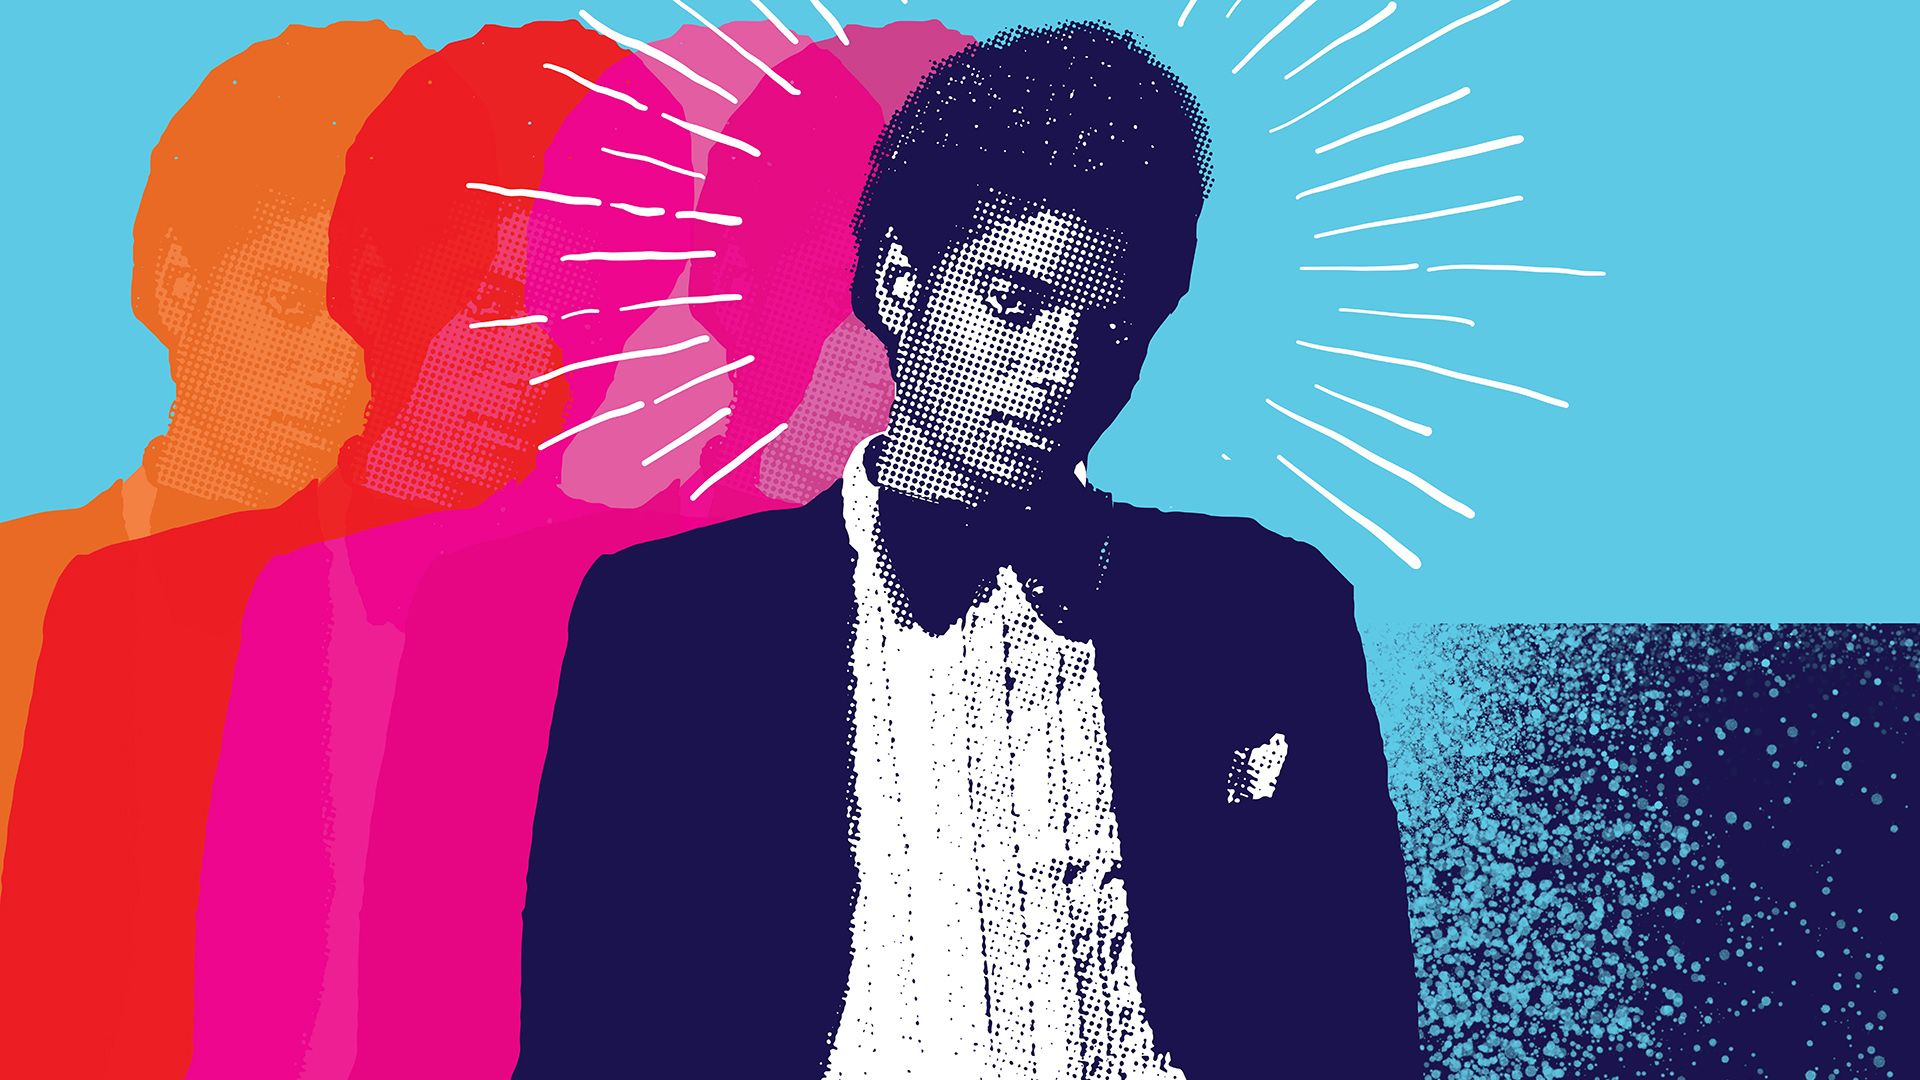 Michael Jackson's Journey from Motown to Off the Wall background